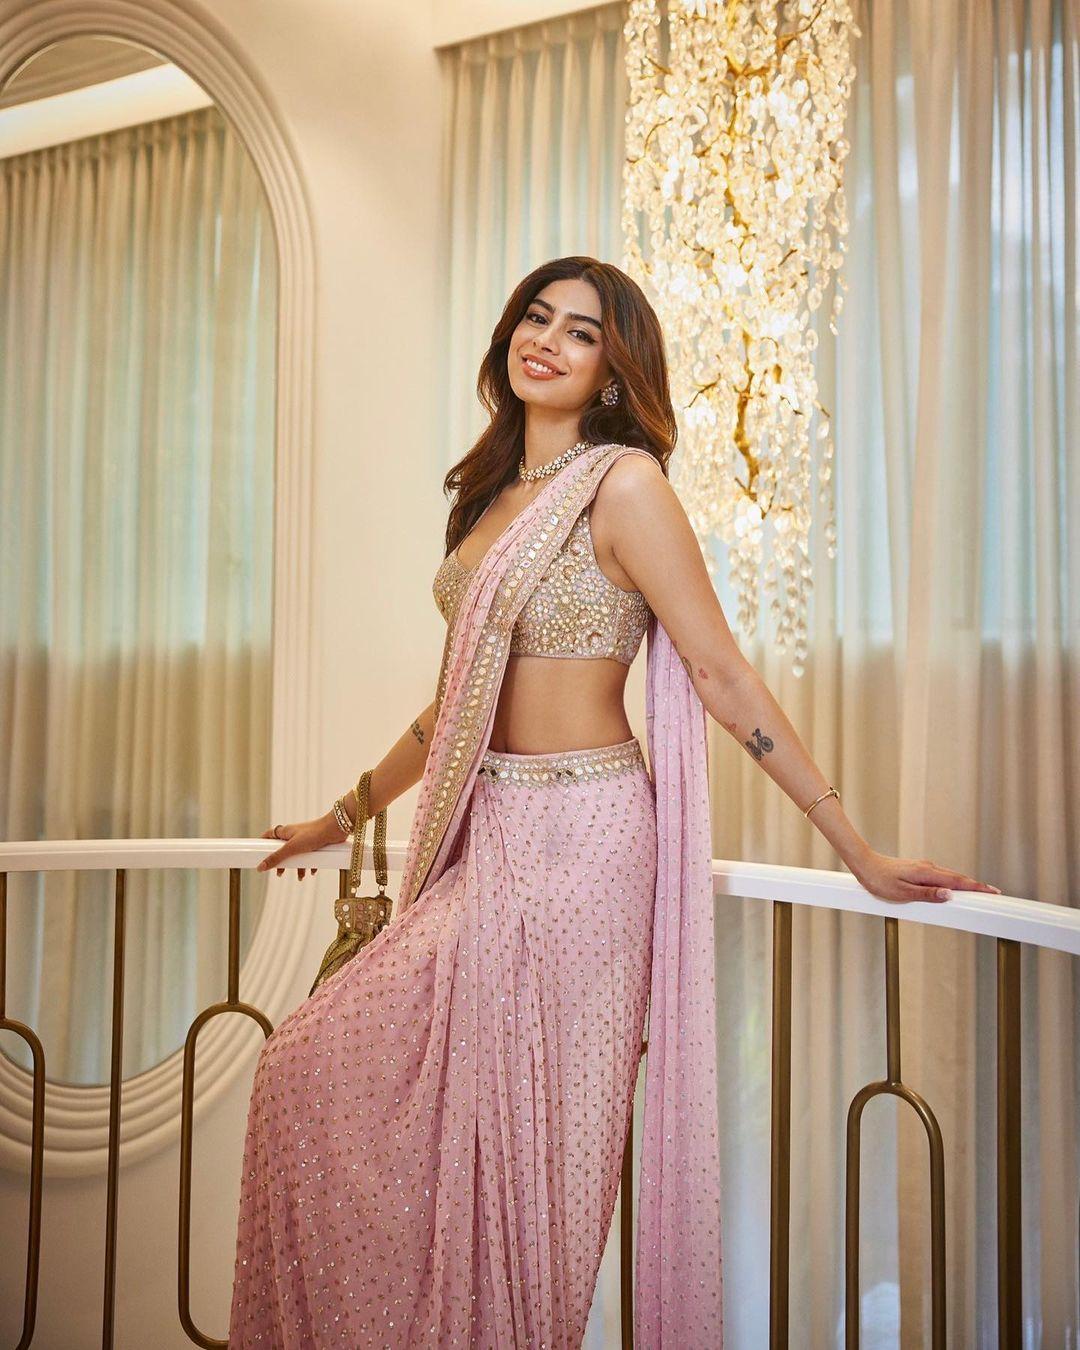 Khushi Kapoor looked absolutely stunning in a pink mirror-worked saree. Her outfit showcased a perfect blend of traditional and contemporary styles